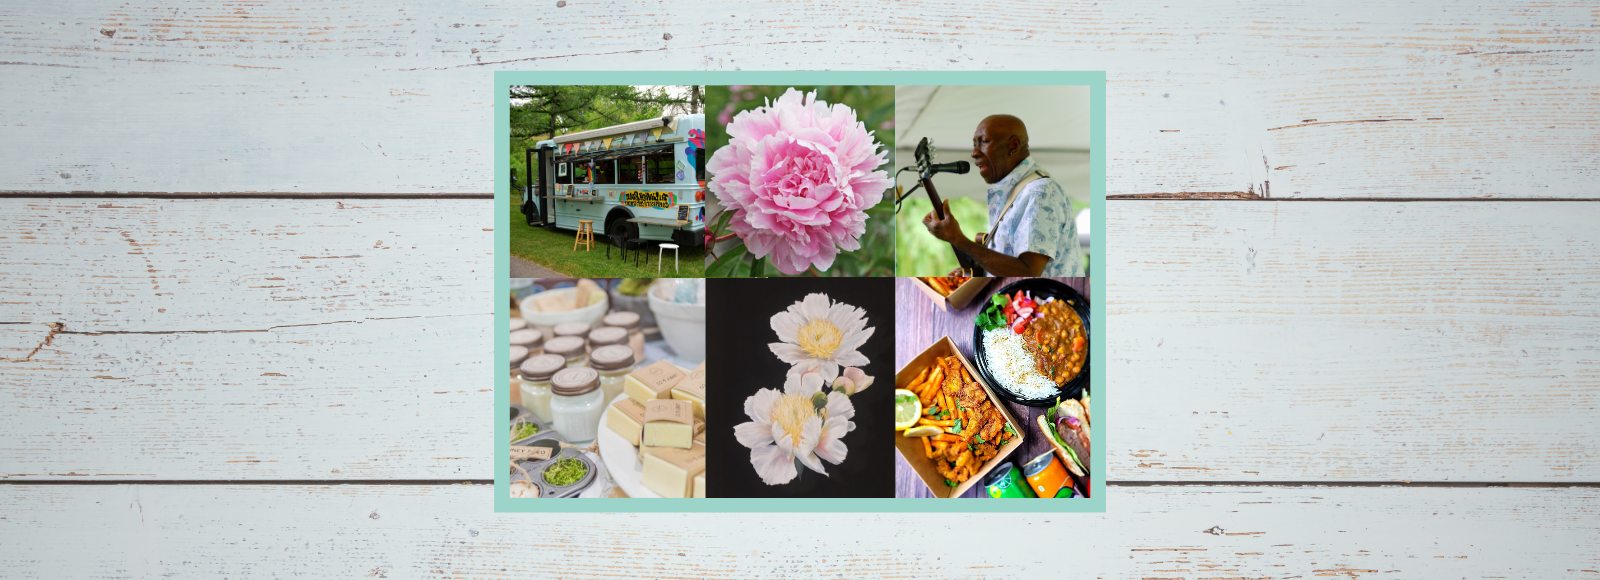 handcrafted cutting boards and soap, pink peony, painted white peony, a musician singing into a microphone and food